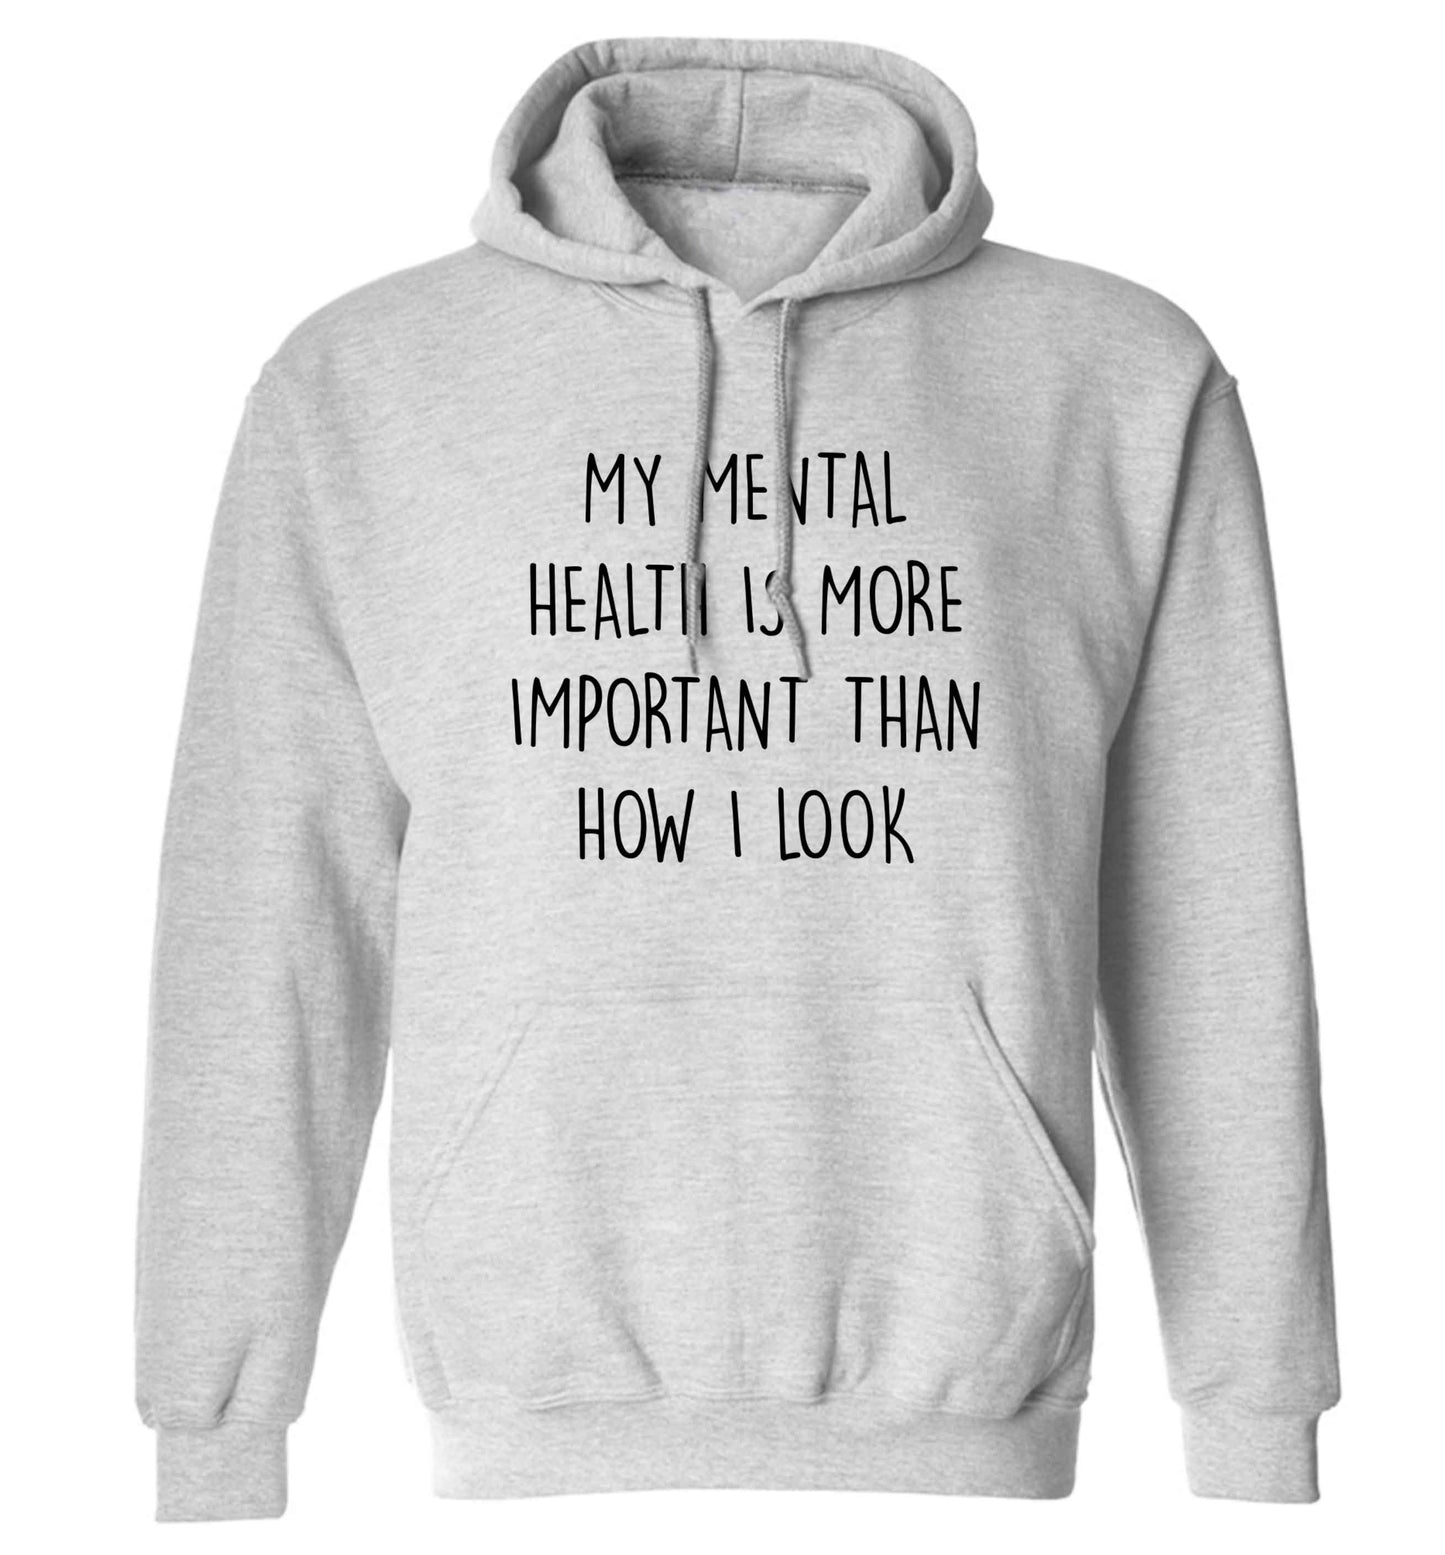 My mental health is more importnat than how I look adults unisex grey hoodie 2XL